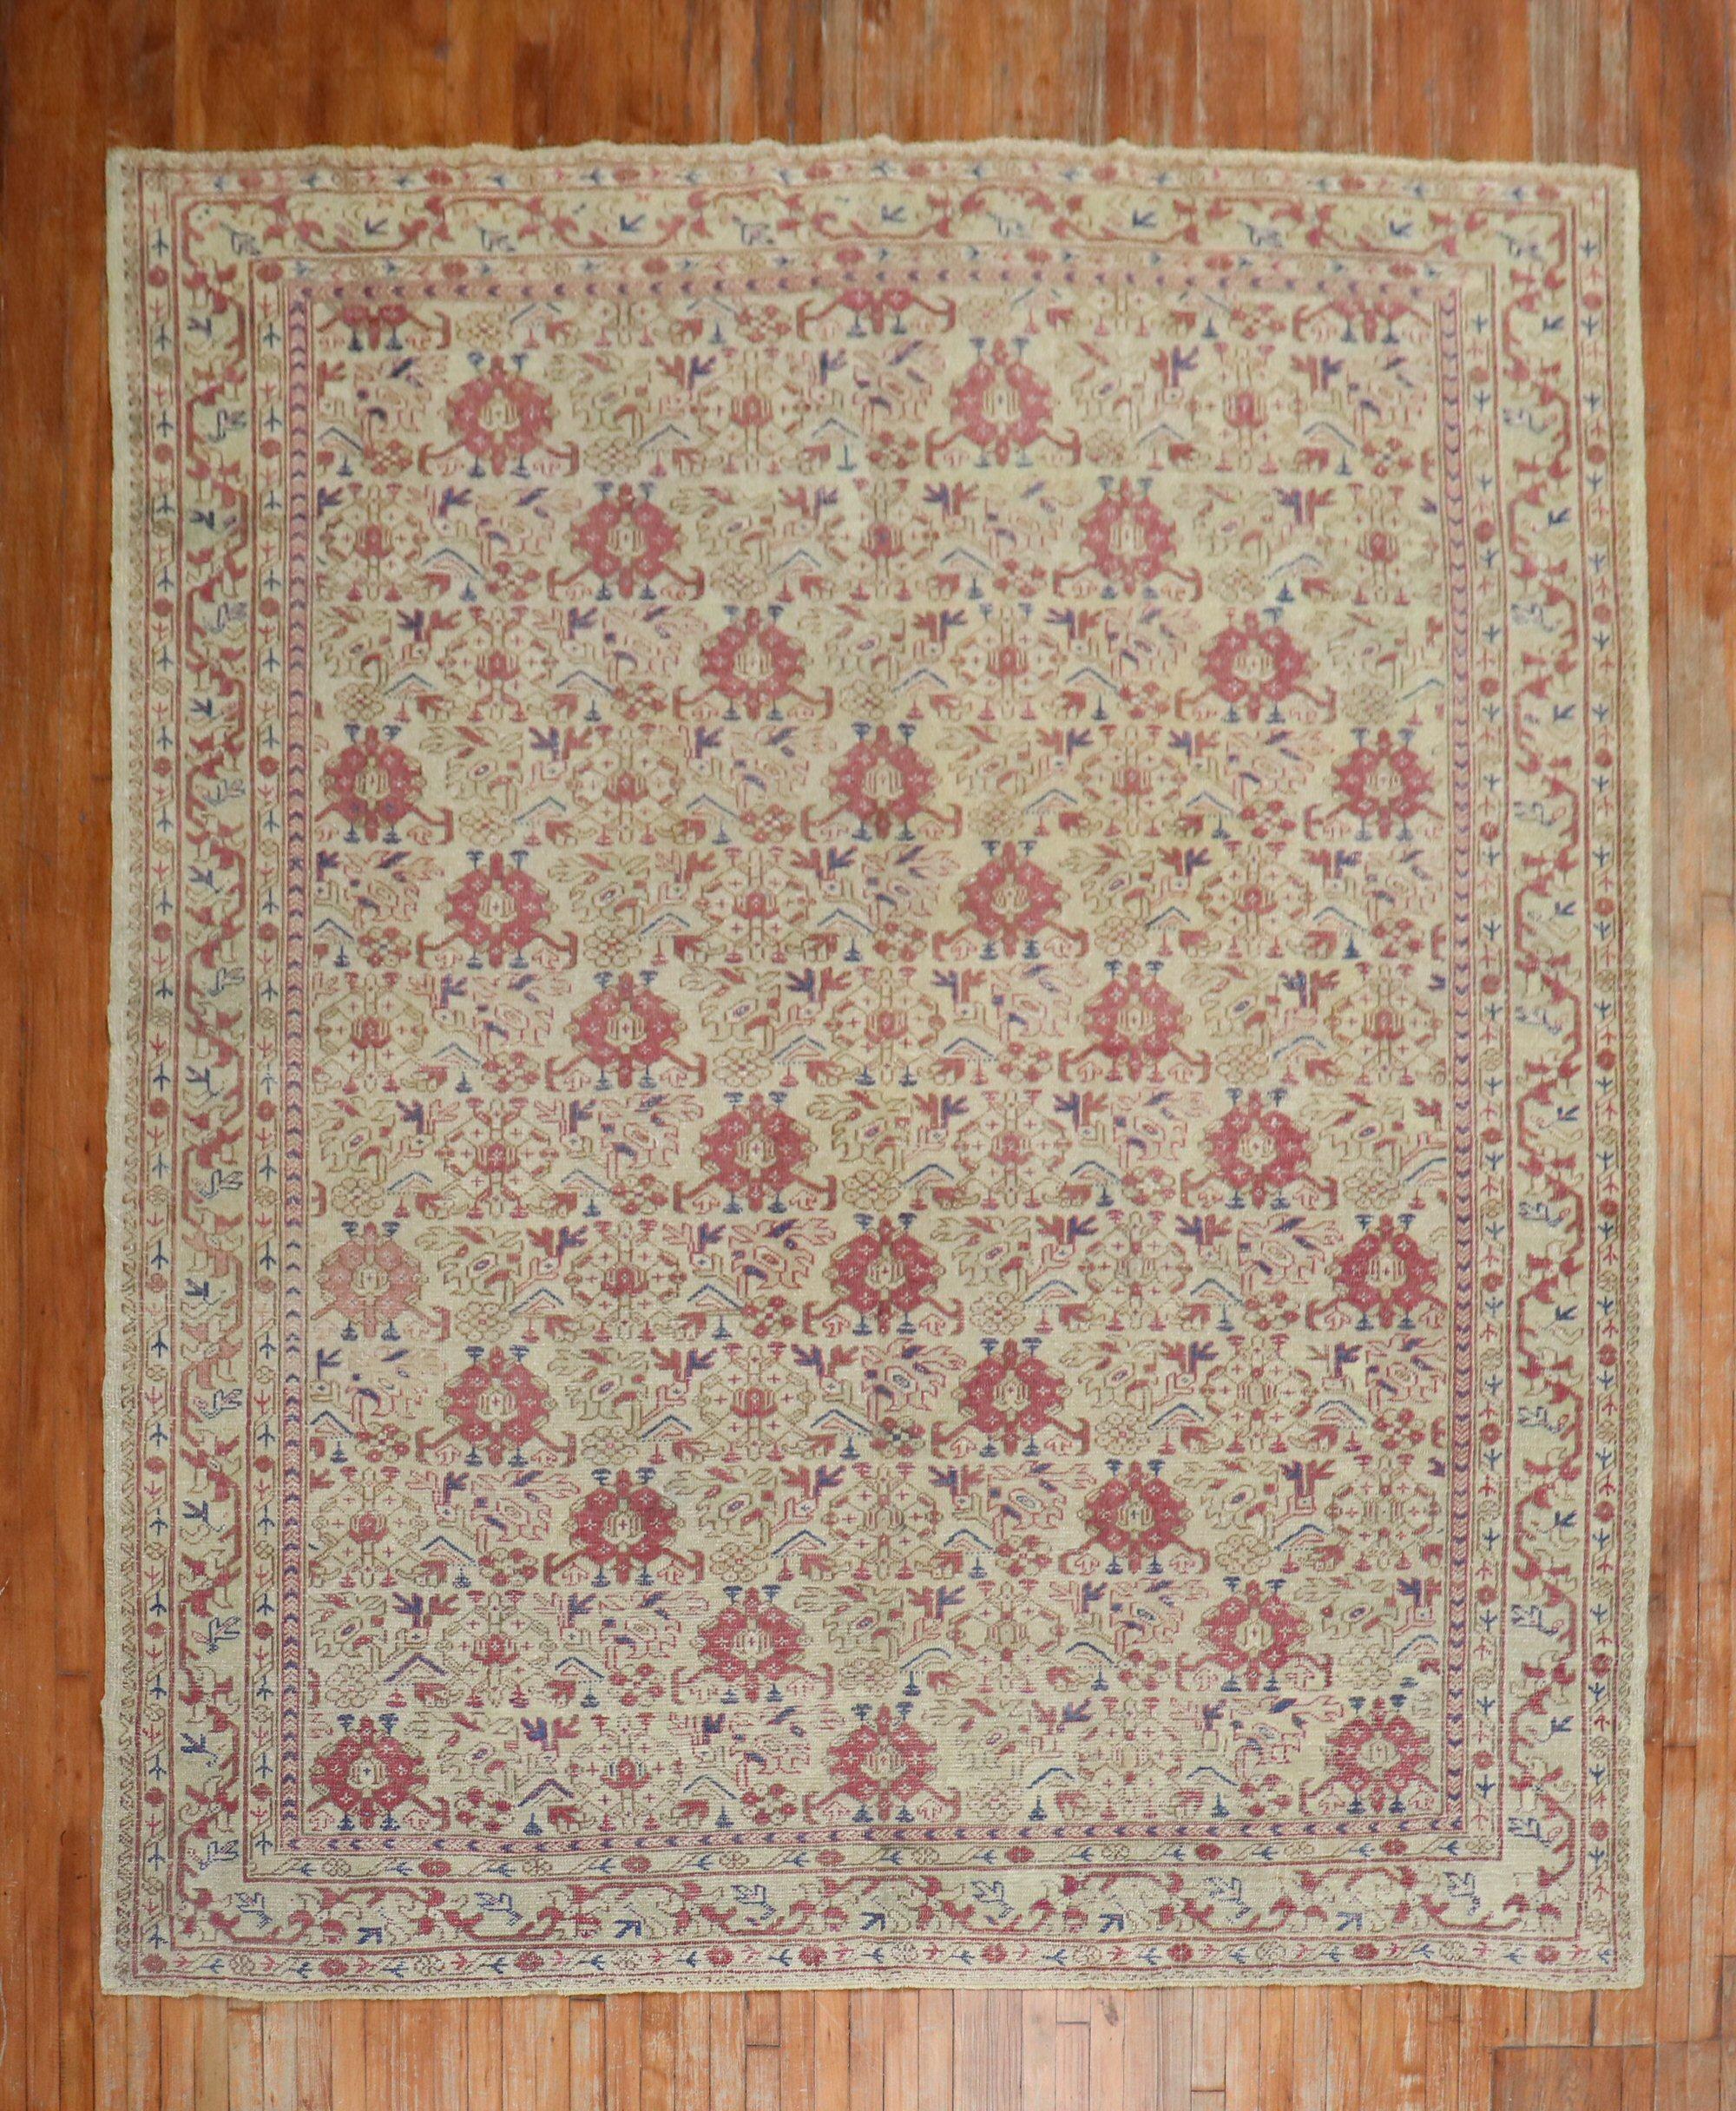 an early 20th century small room size Turkish Ghiordes decorative rug.

Measures: 8'6'' x 10'2''.